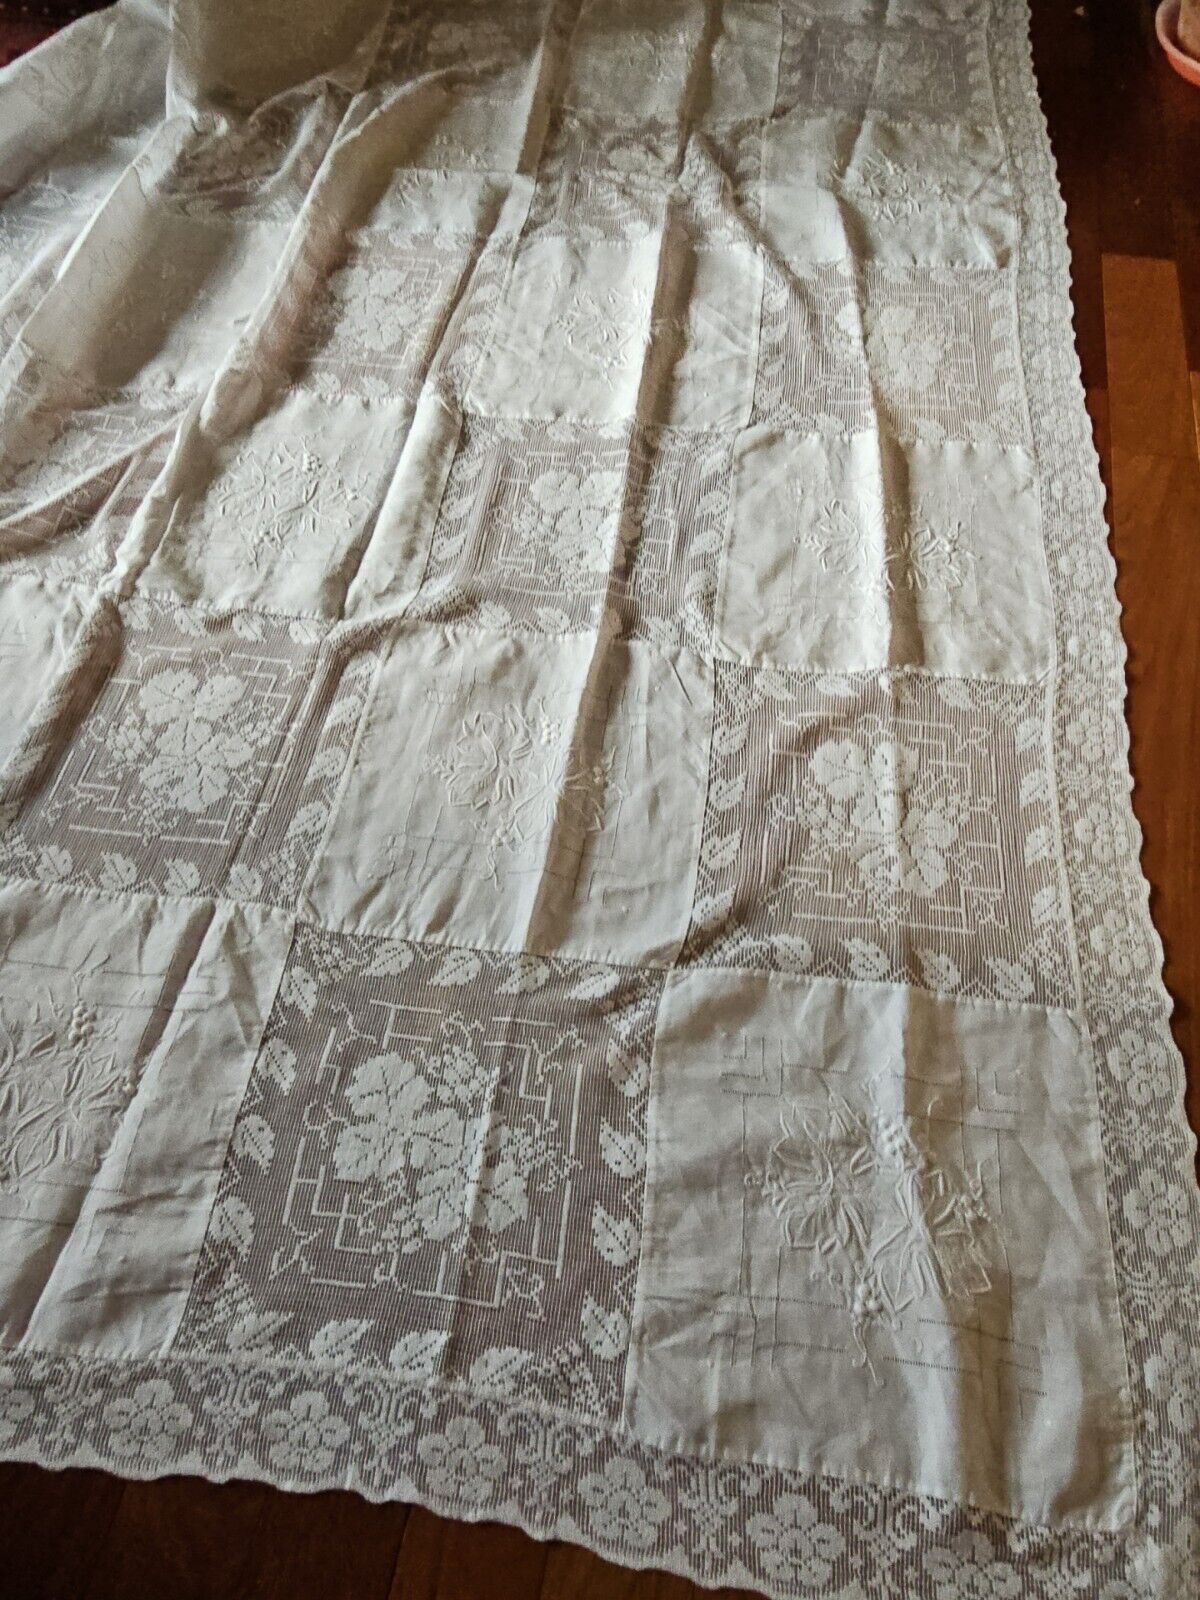 Vintage Pristine Lace & Embroidered Tablecloth Grape Motif 66x98 Inches (Tf)